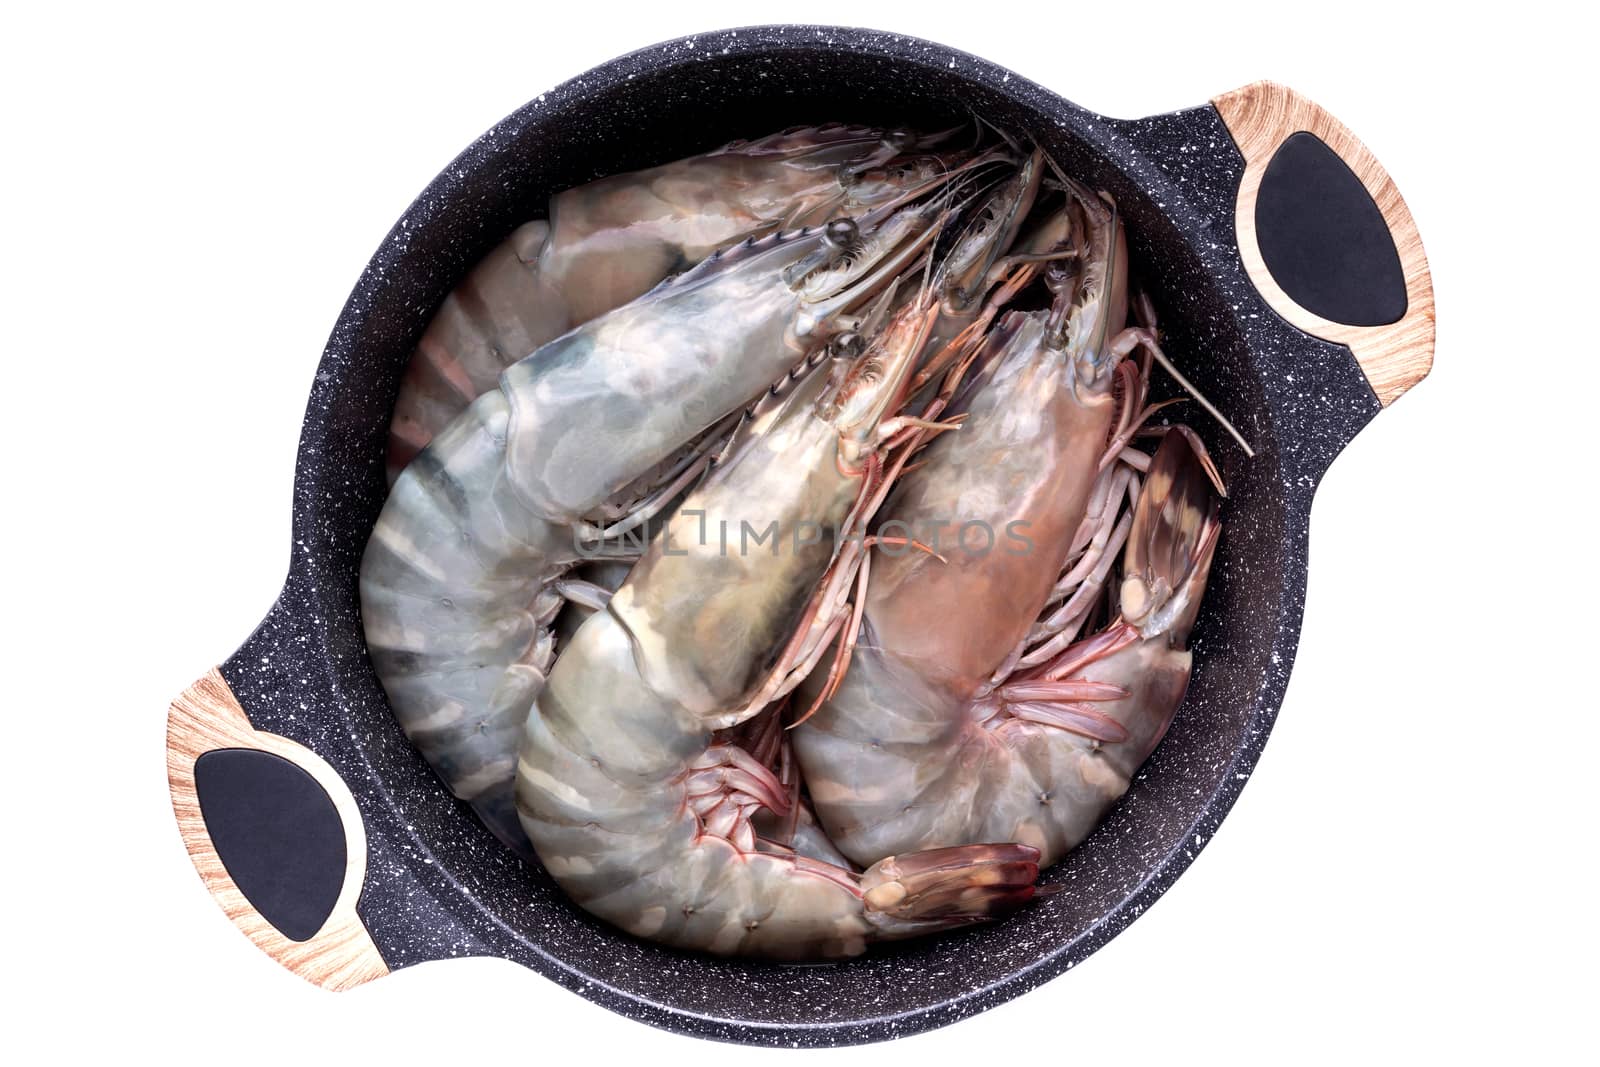 homemade raw salt-baked shrimp or prawn in pot to be cooked by happycreator